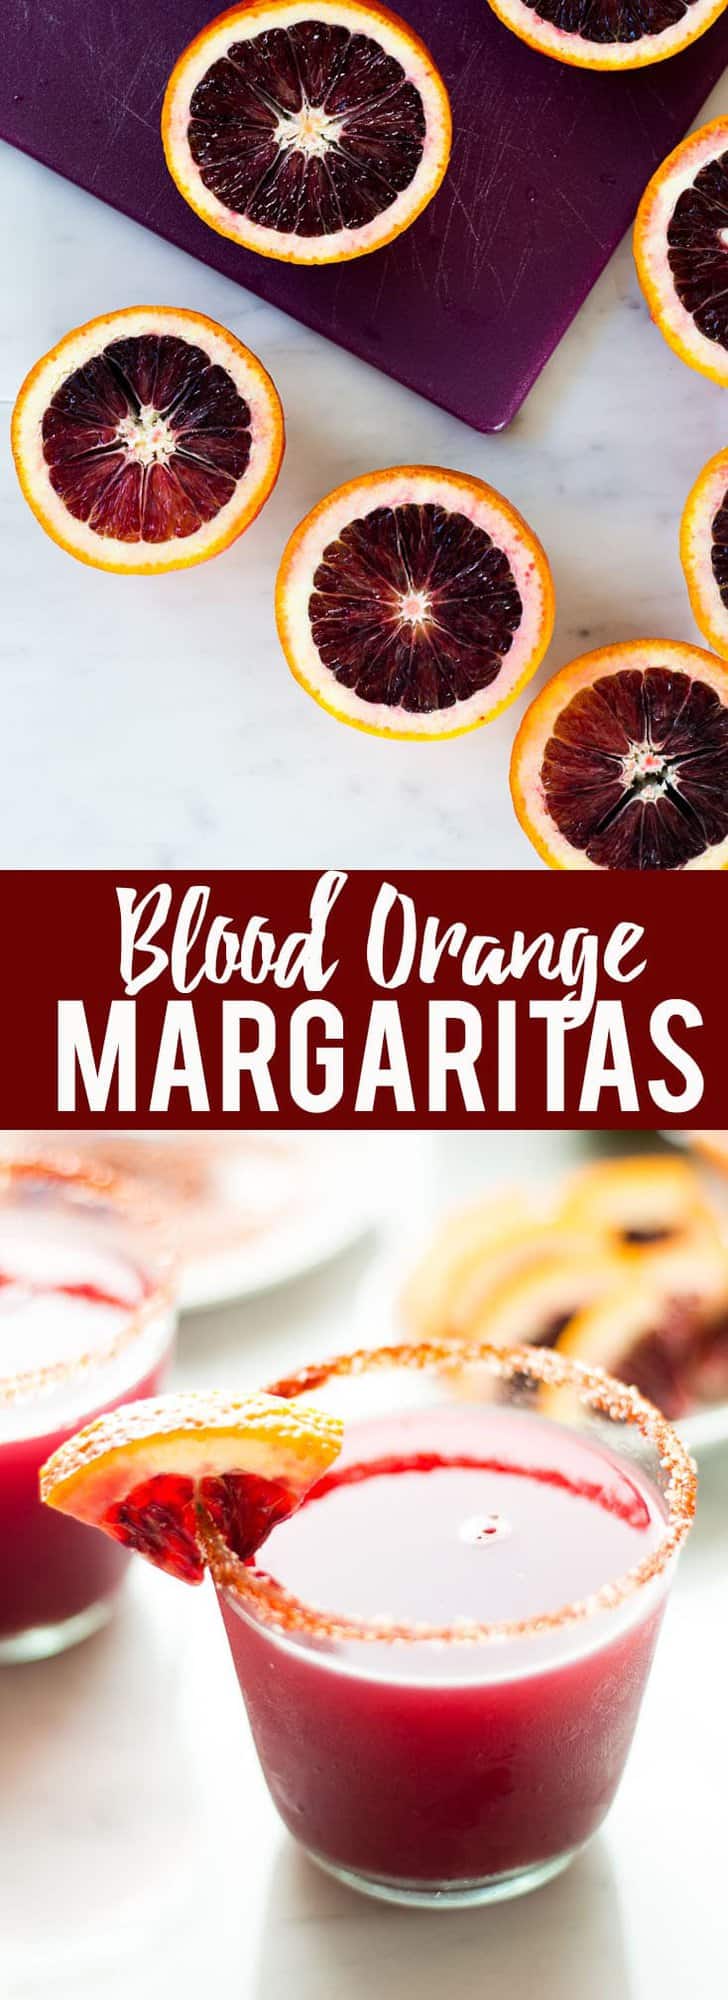 This Fresh Blood Orange Margarita has an optional smoky salted rim. The fresh citrus flavors of the blood orange make this a sweet and tart cocktail, and the smoked paprika salted rim gives it a little something extra.